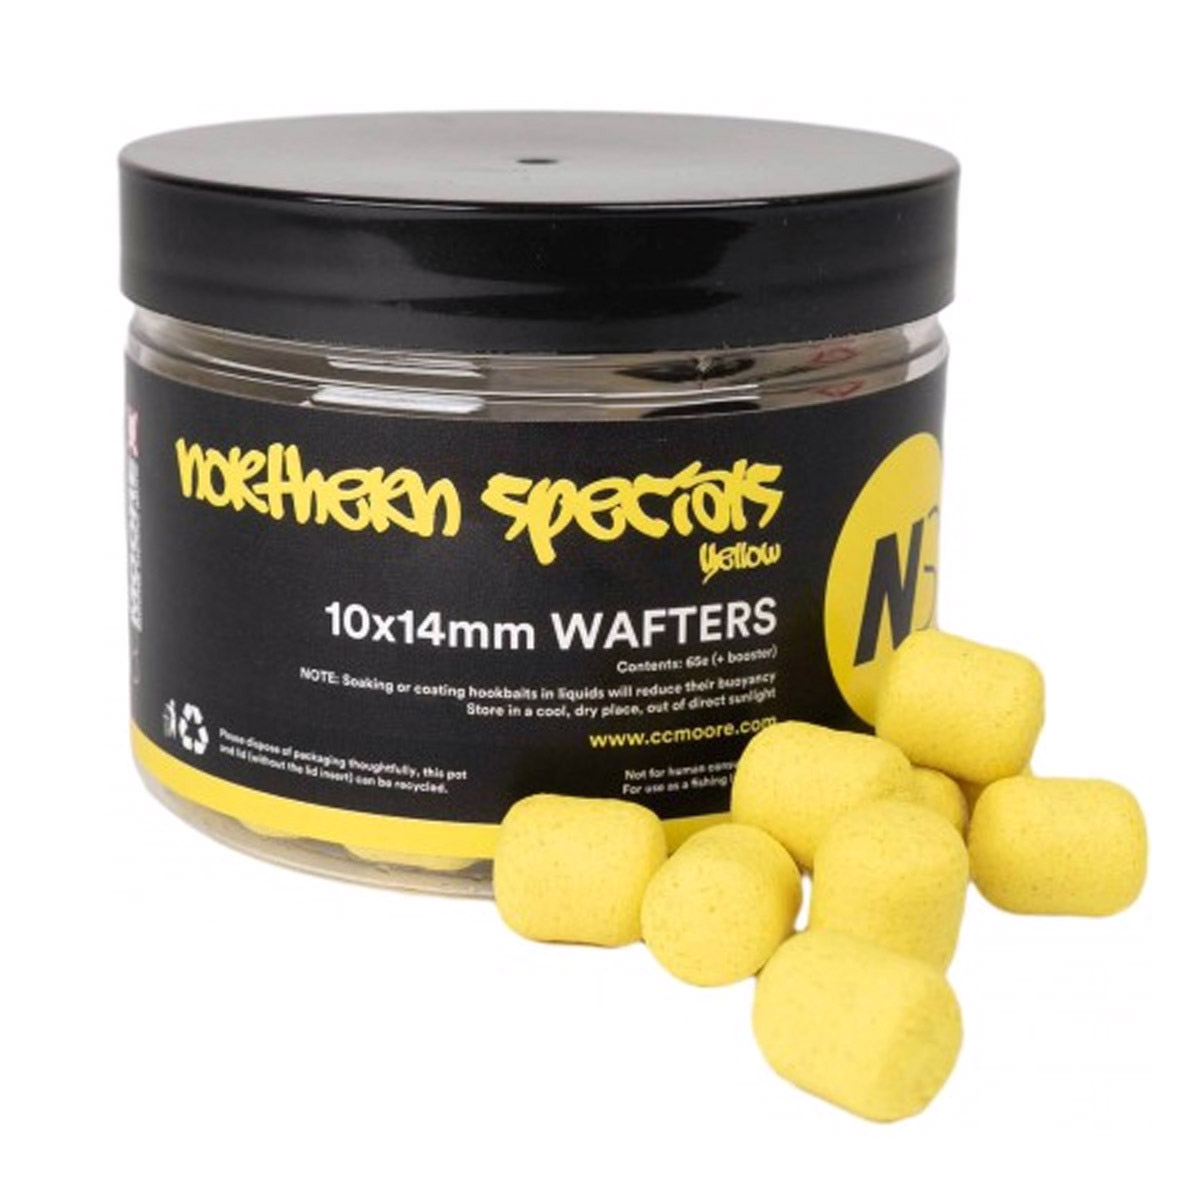 Cc Moore NS1 Dumbell Wafters Yellow 10x14mm